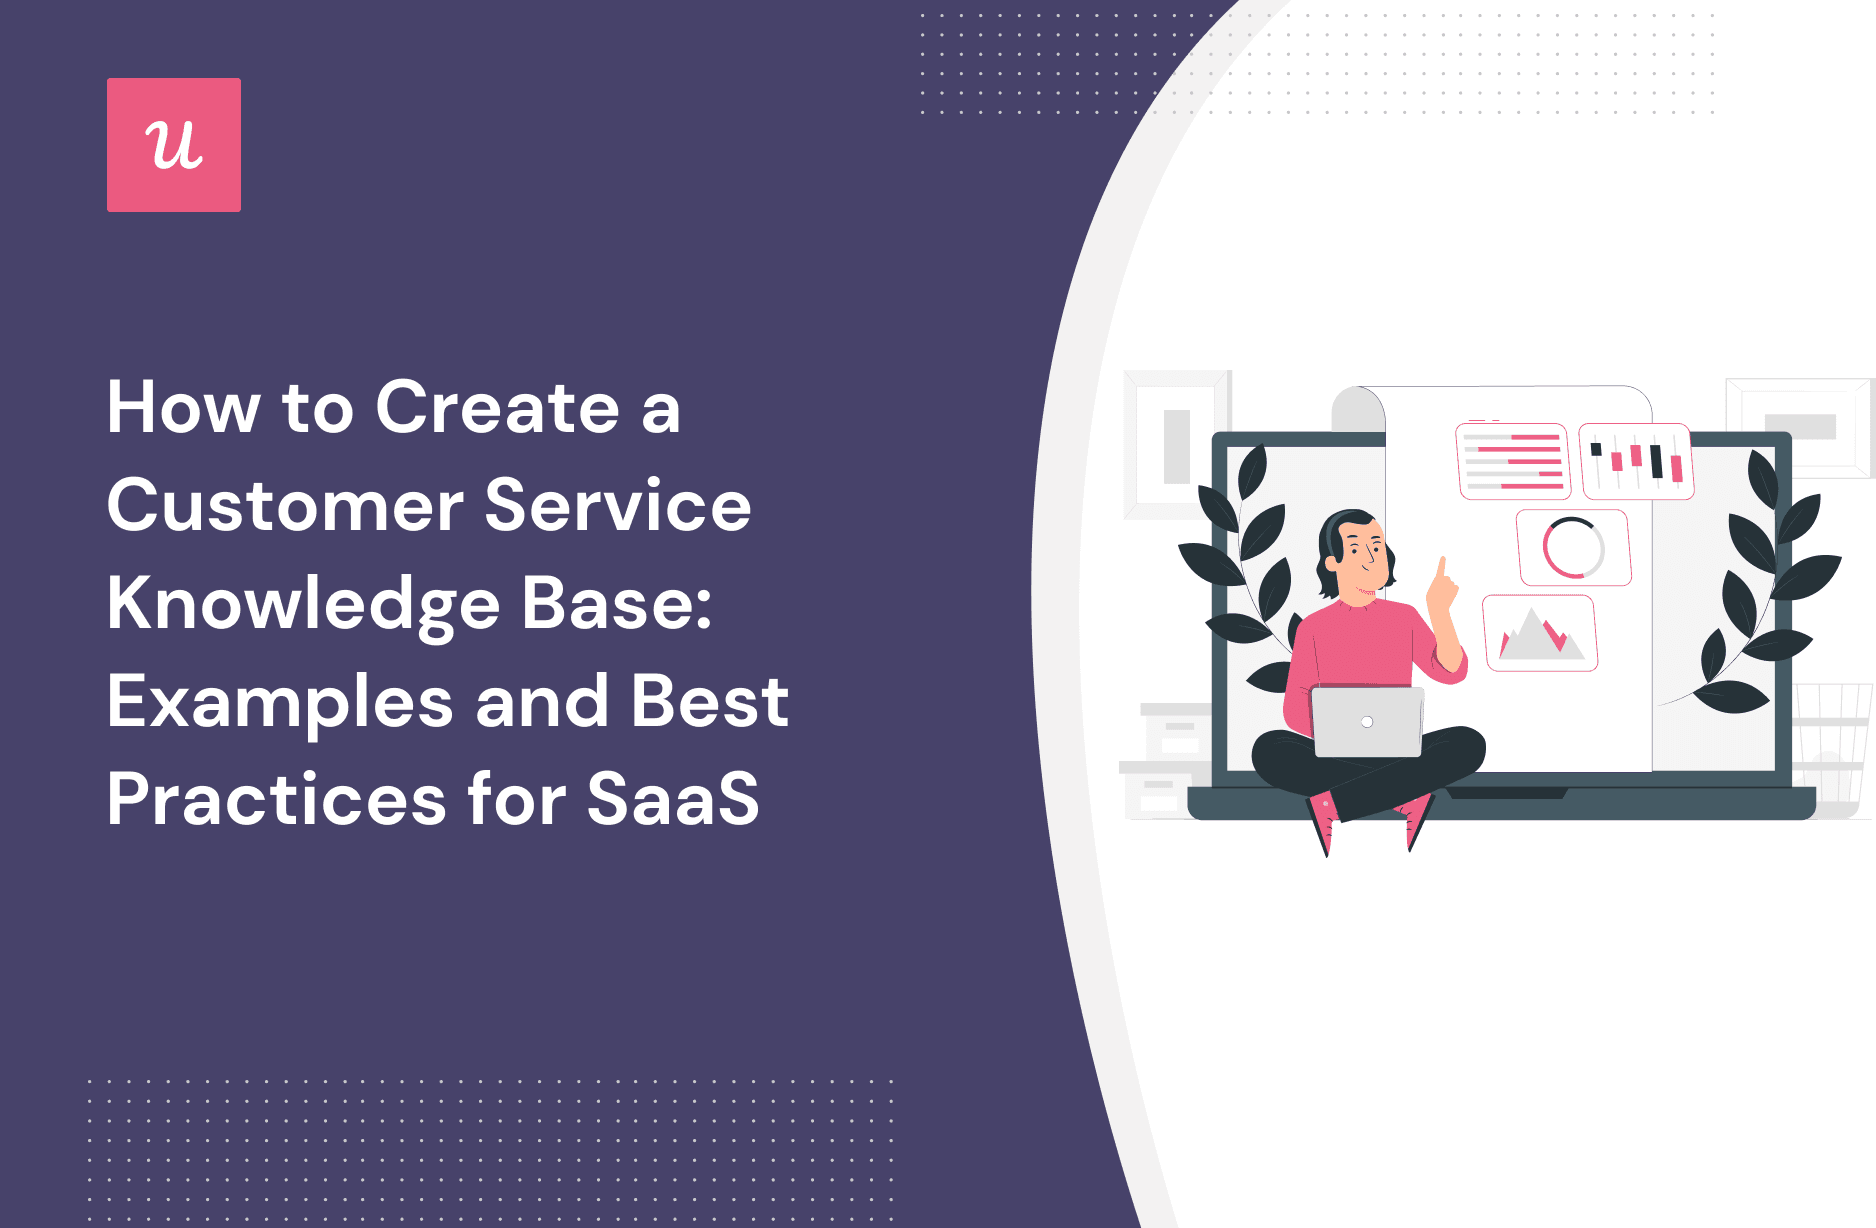 How to Create a Customer Service Knowledge Base: Examples and Best Practices for SaaS cover